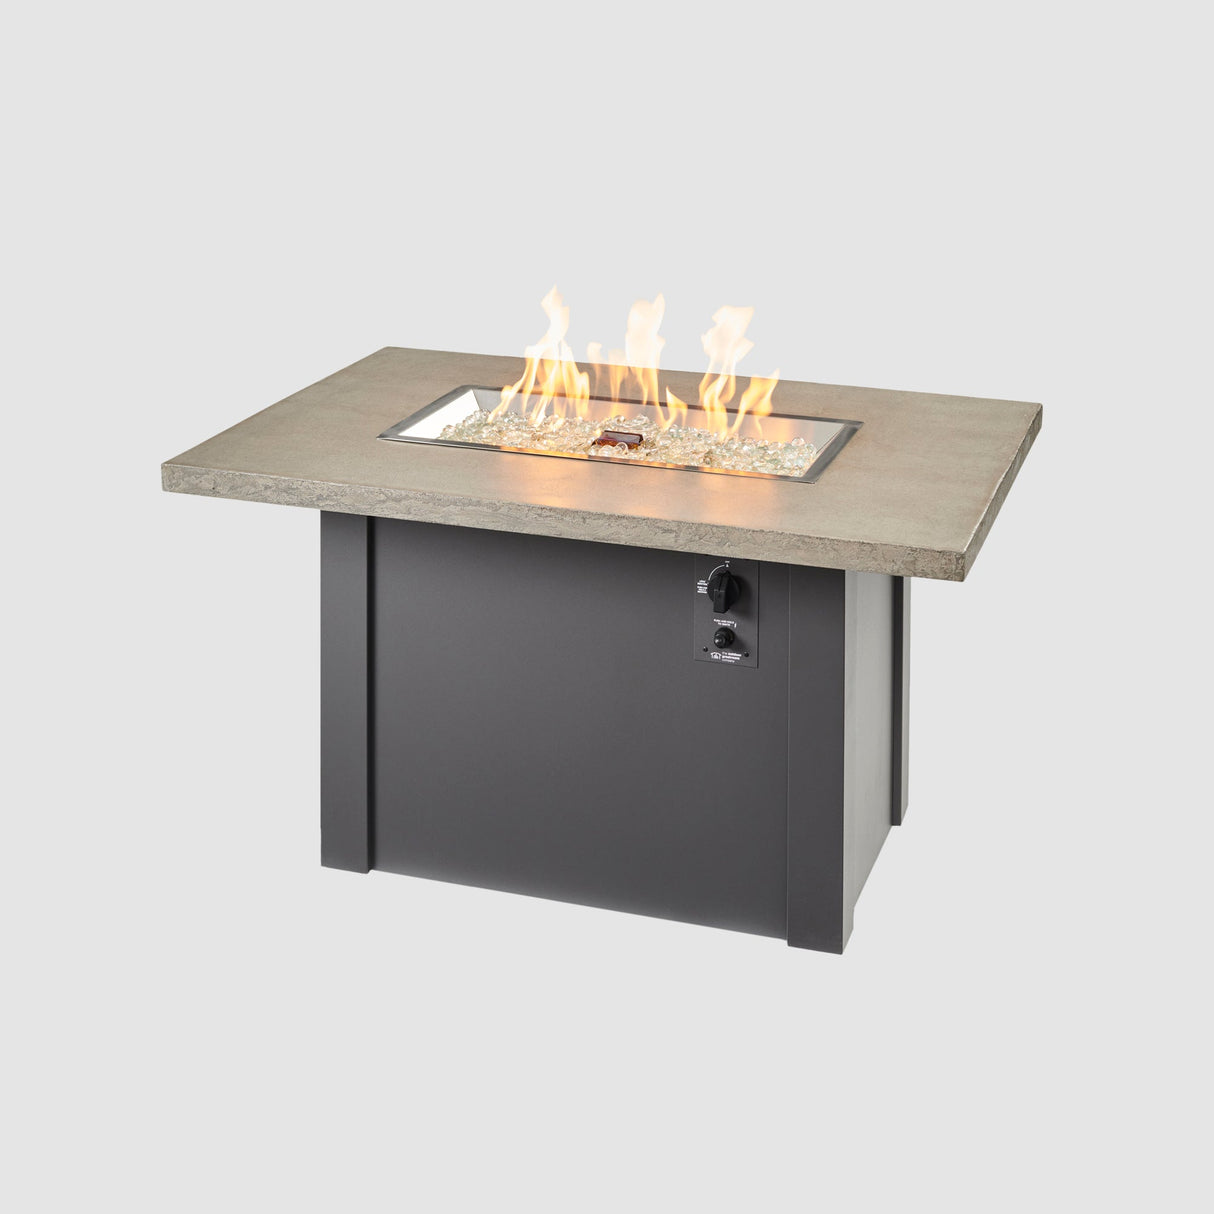 A large flame coming off the burner of a Havenwood Rectangular Gas Fire Pit Table with a Pebble Grey top and Graphite Grey base